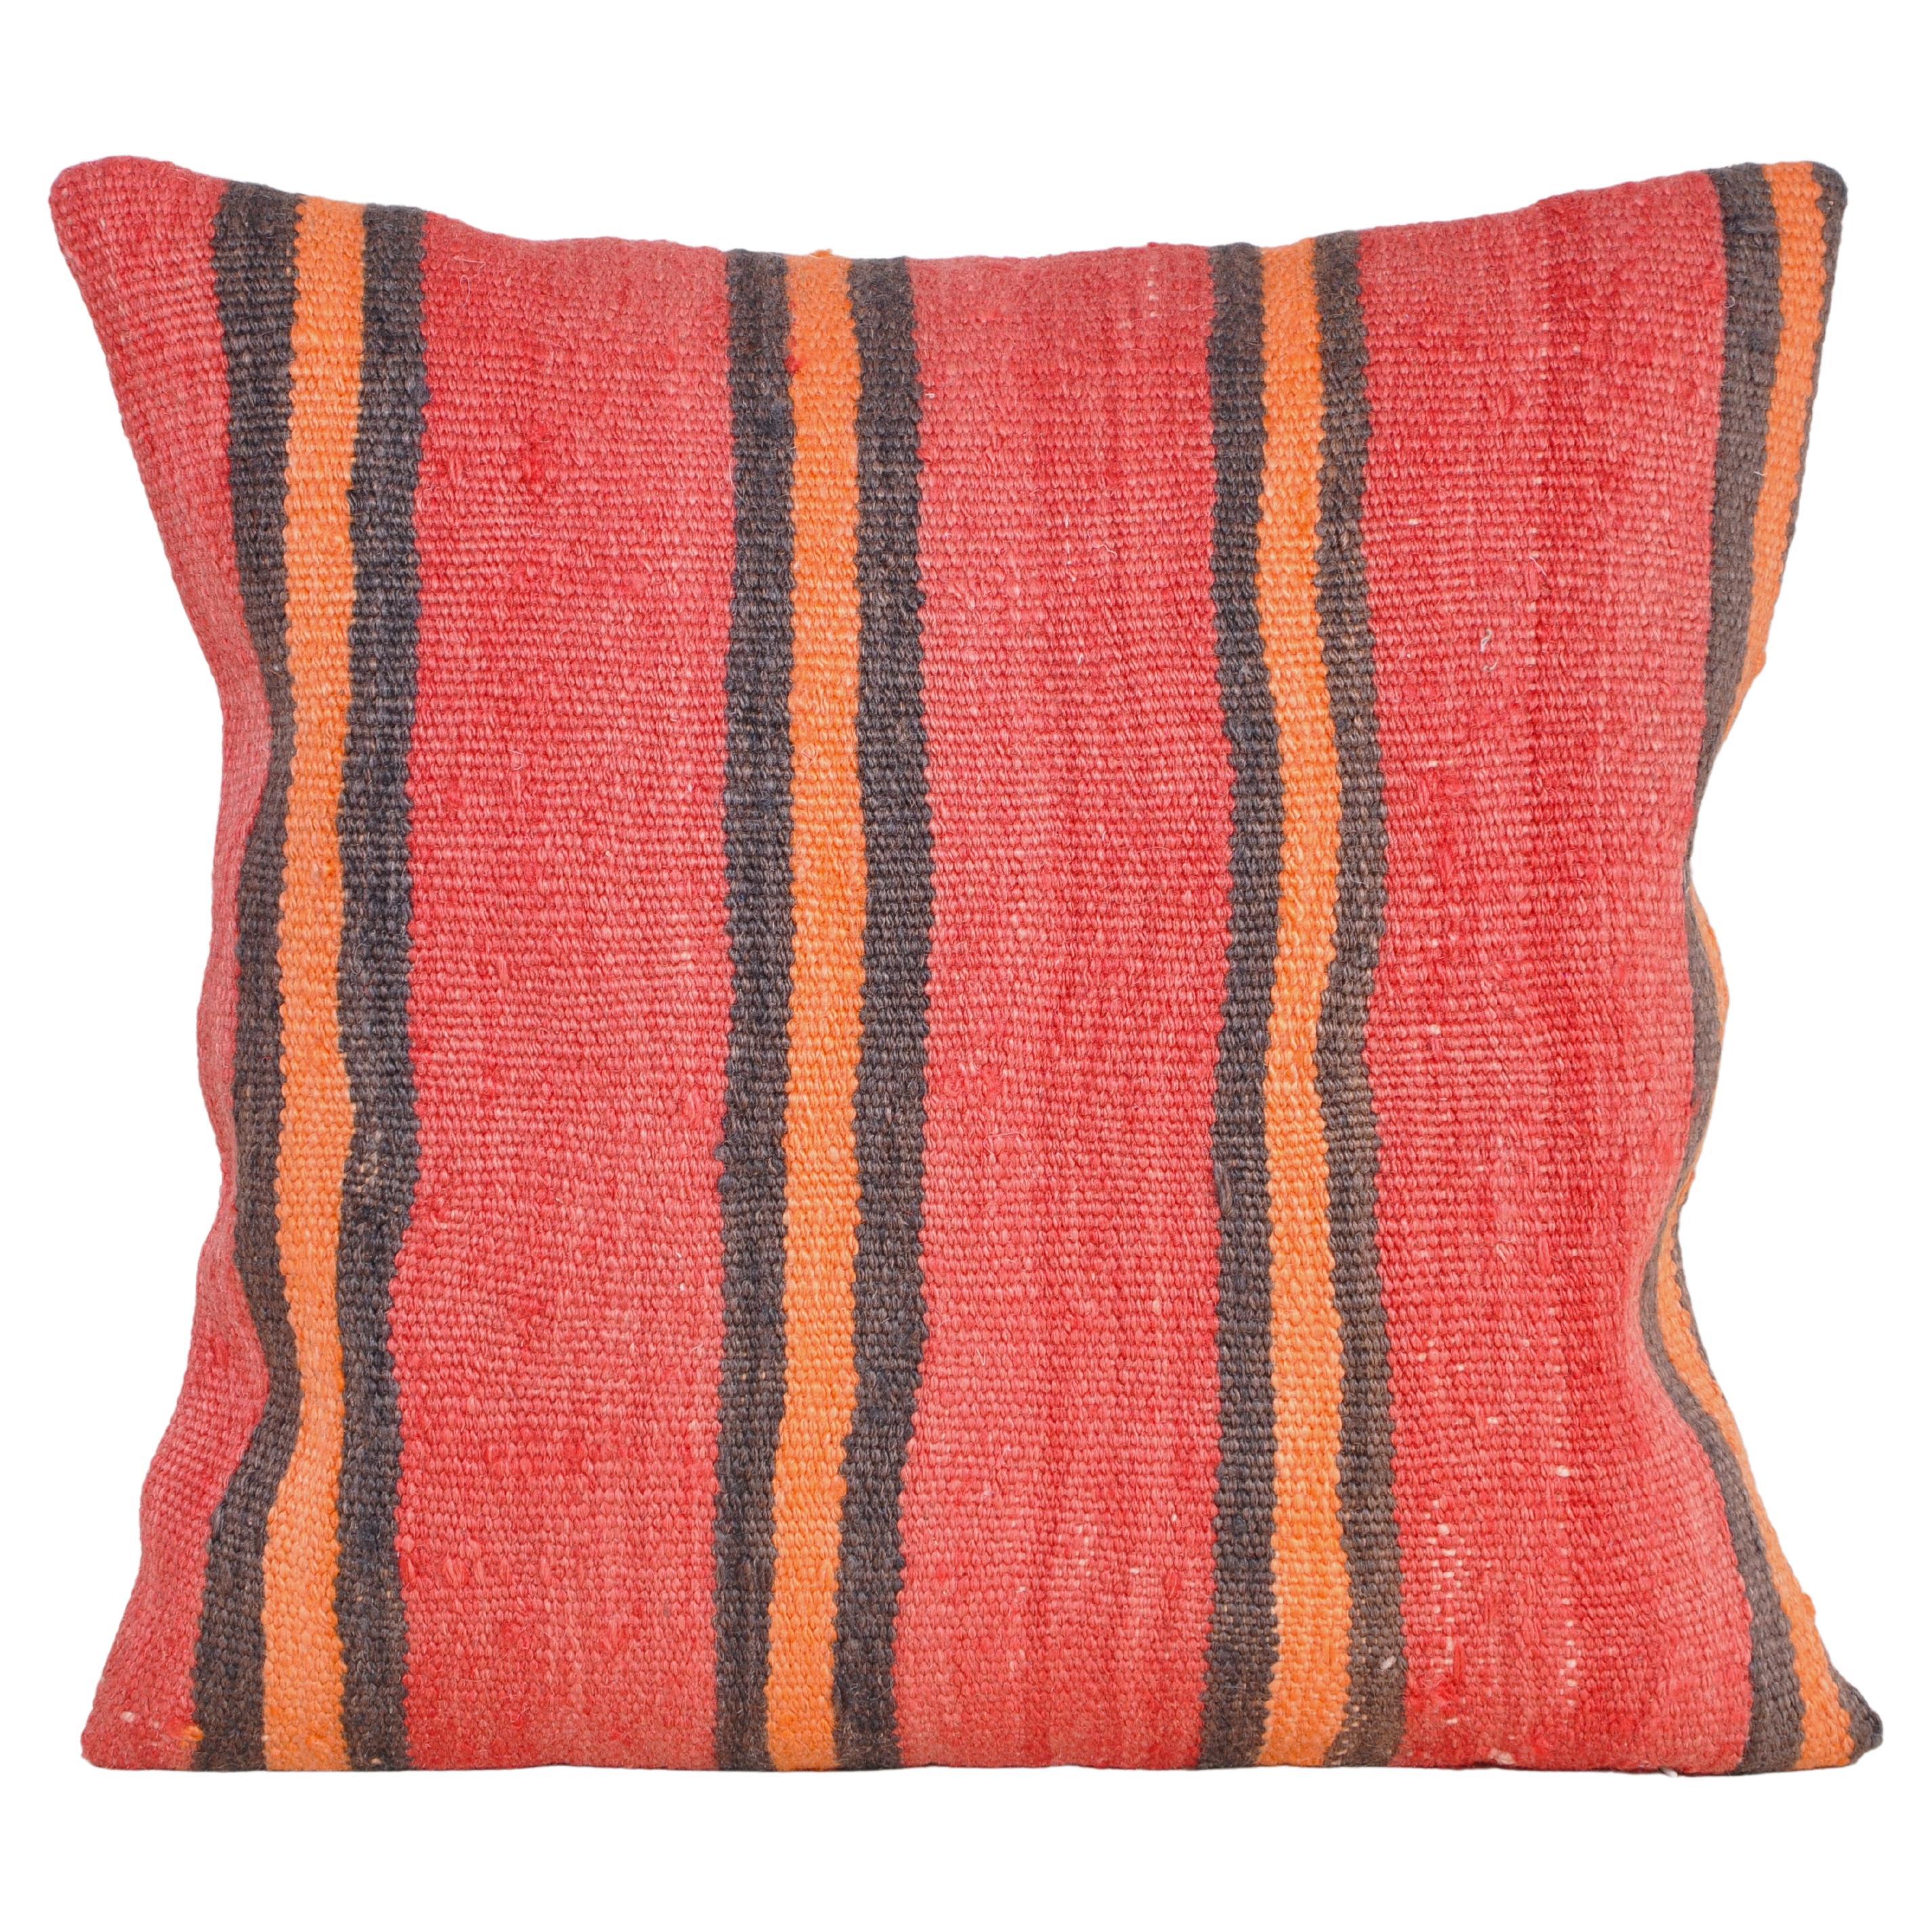 Vintage Kilim Rug Pillow with Irish Linen by Katie Larmour Couture Cushions Red